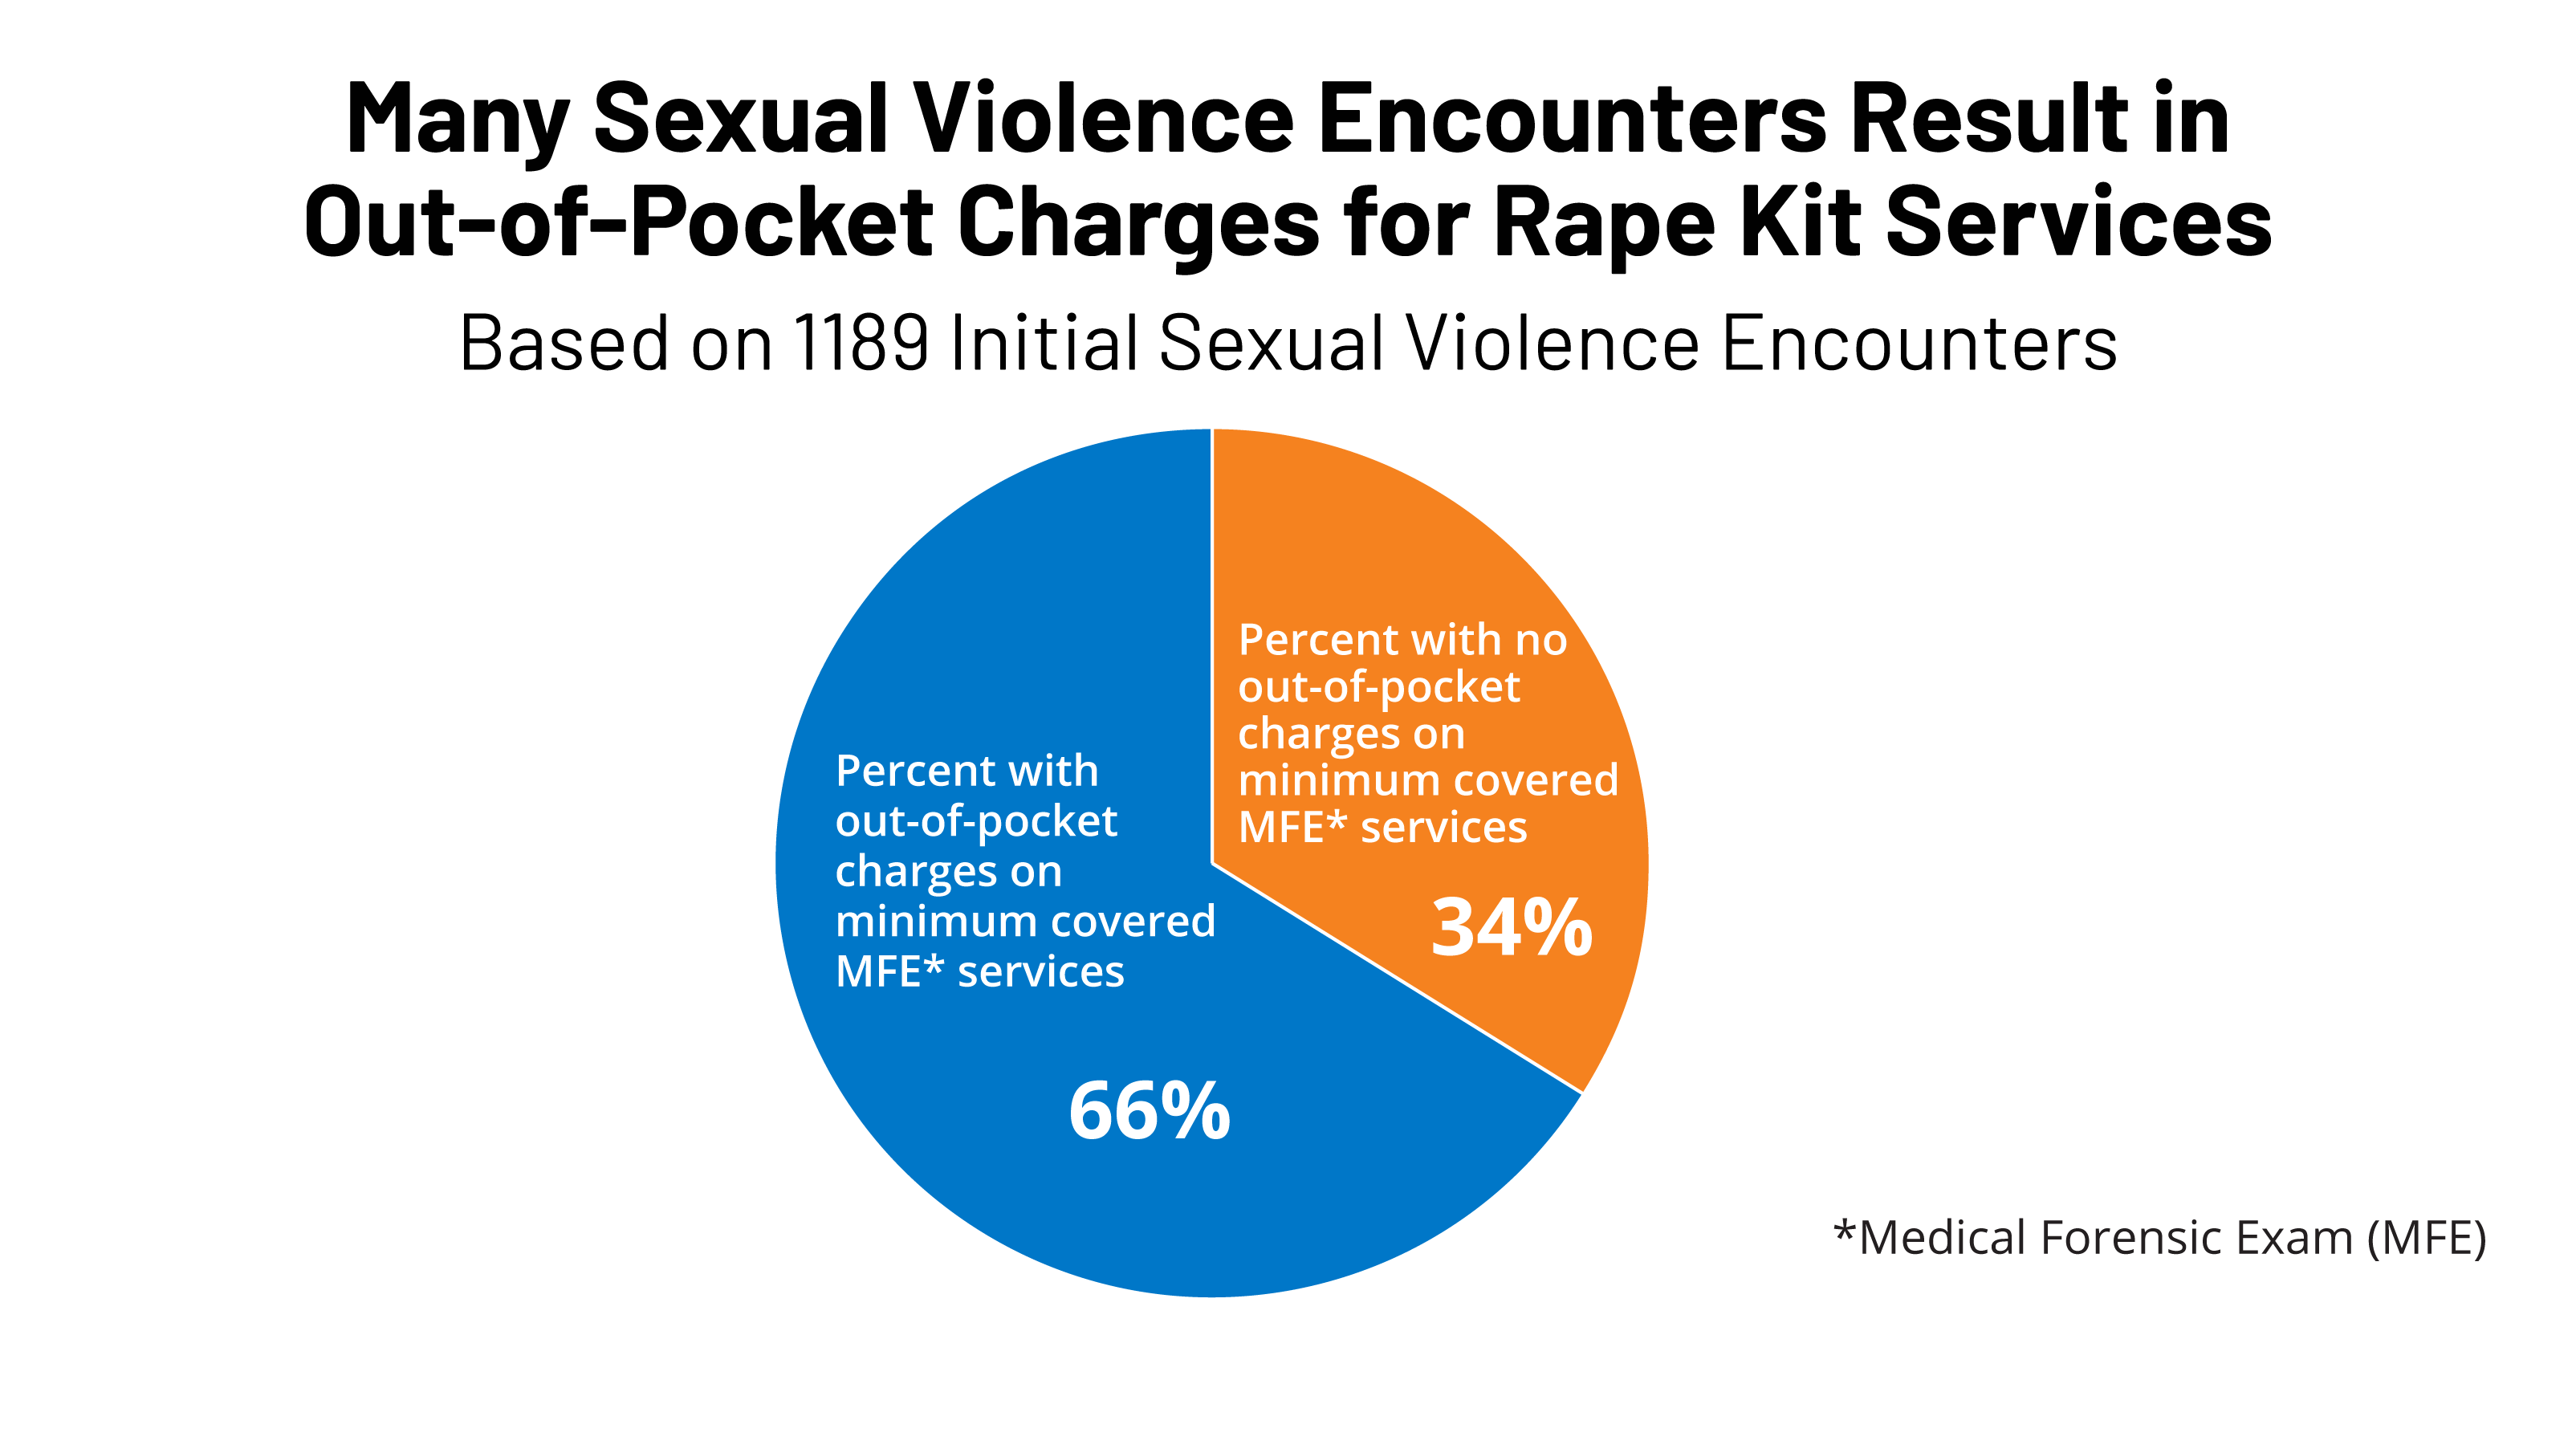 Out-of-Pocket Charges for Rape Kits and Services for Sexual Assault Survivors